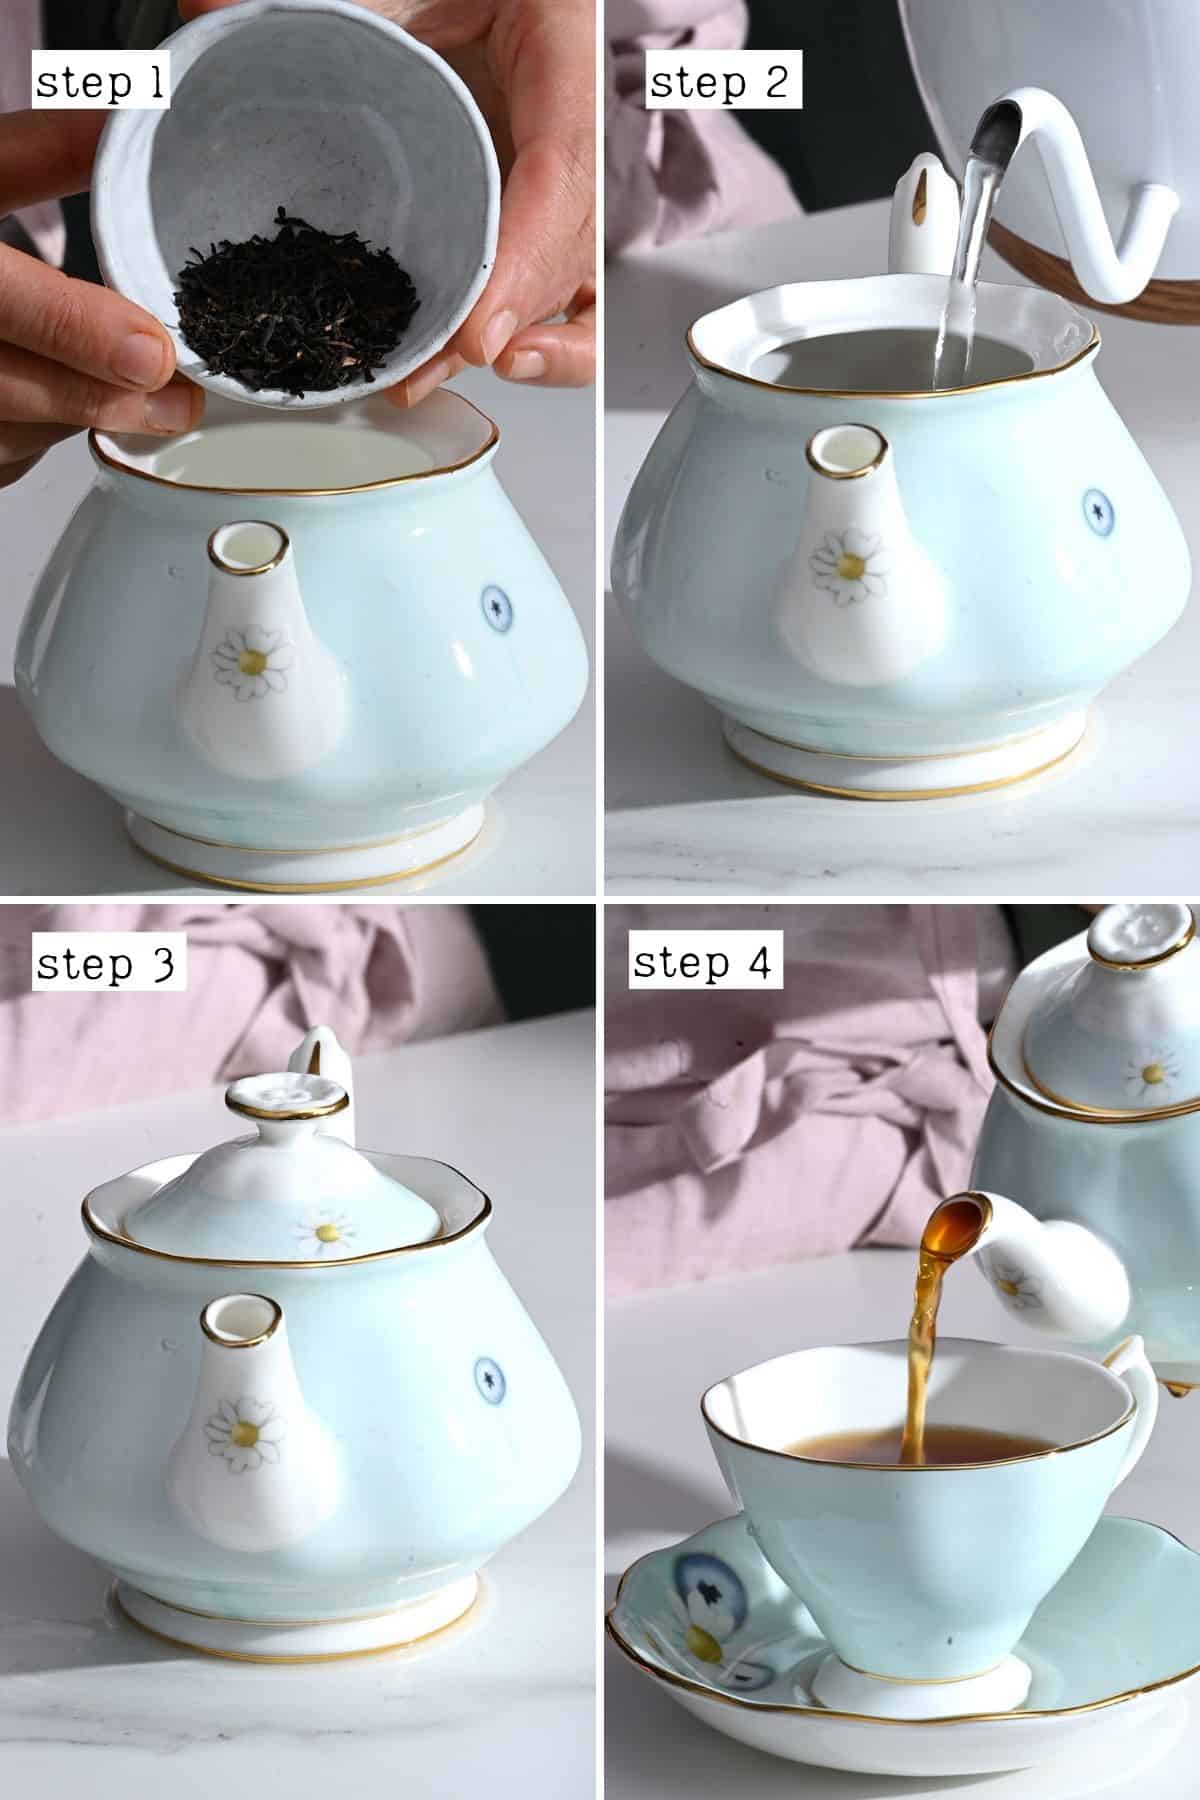 Tea Kettles: Prepare the perfect cup of tea with tea kettles for